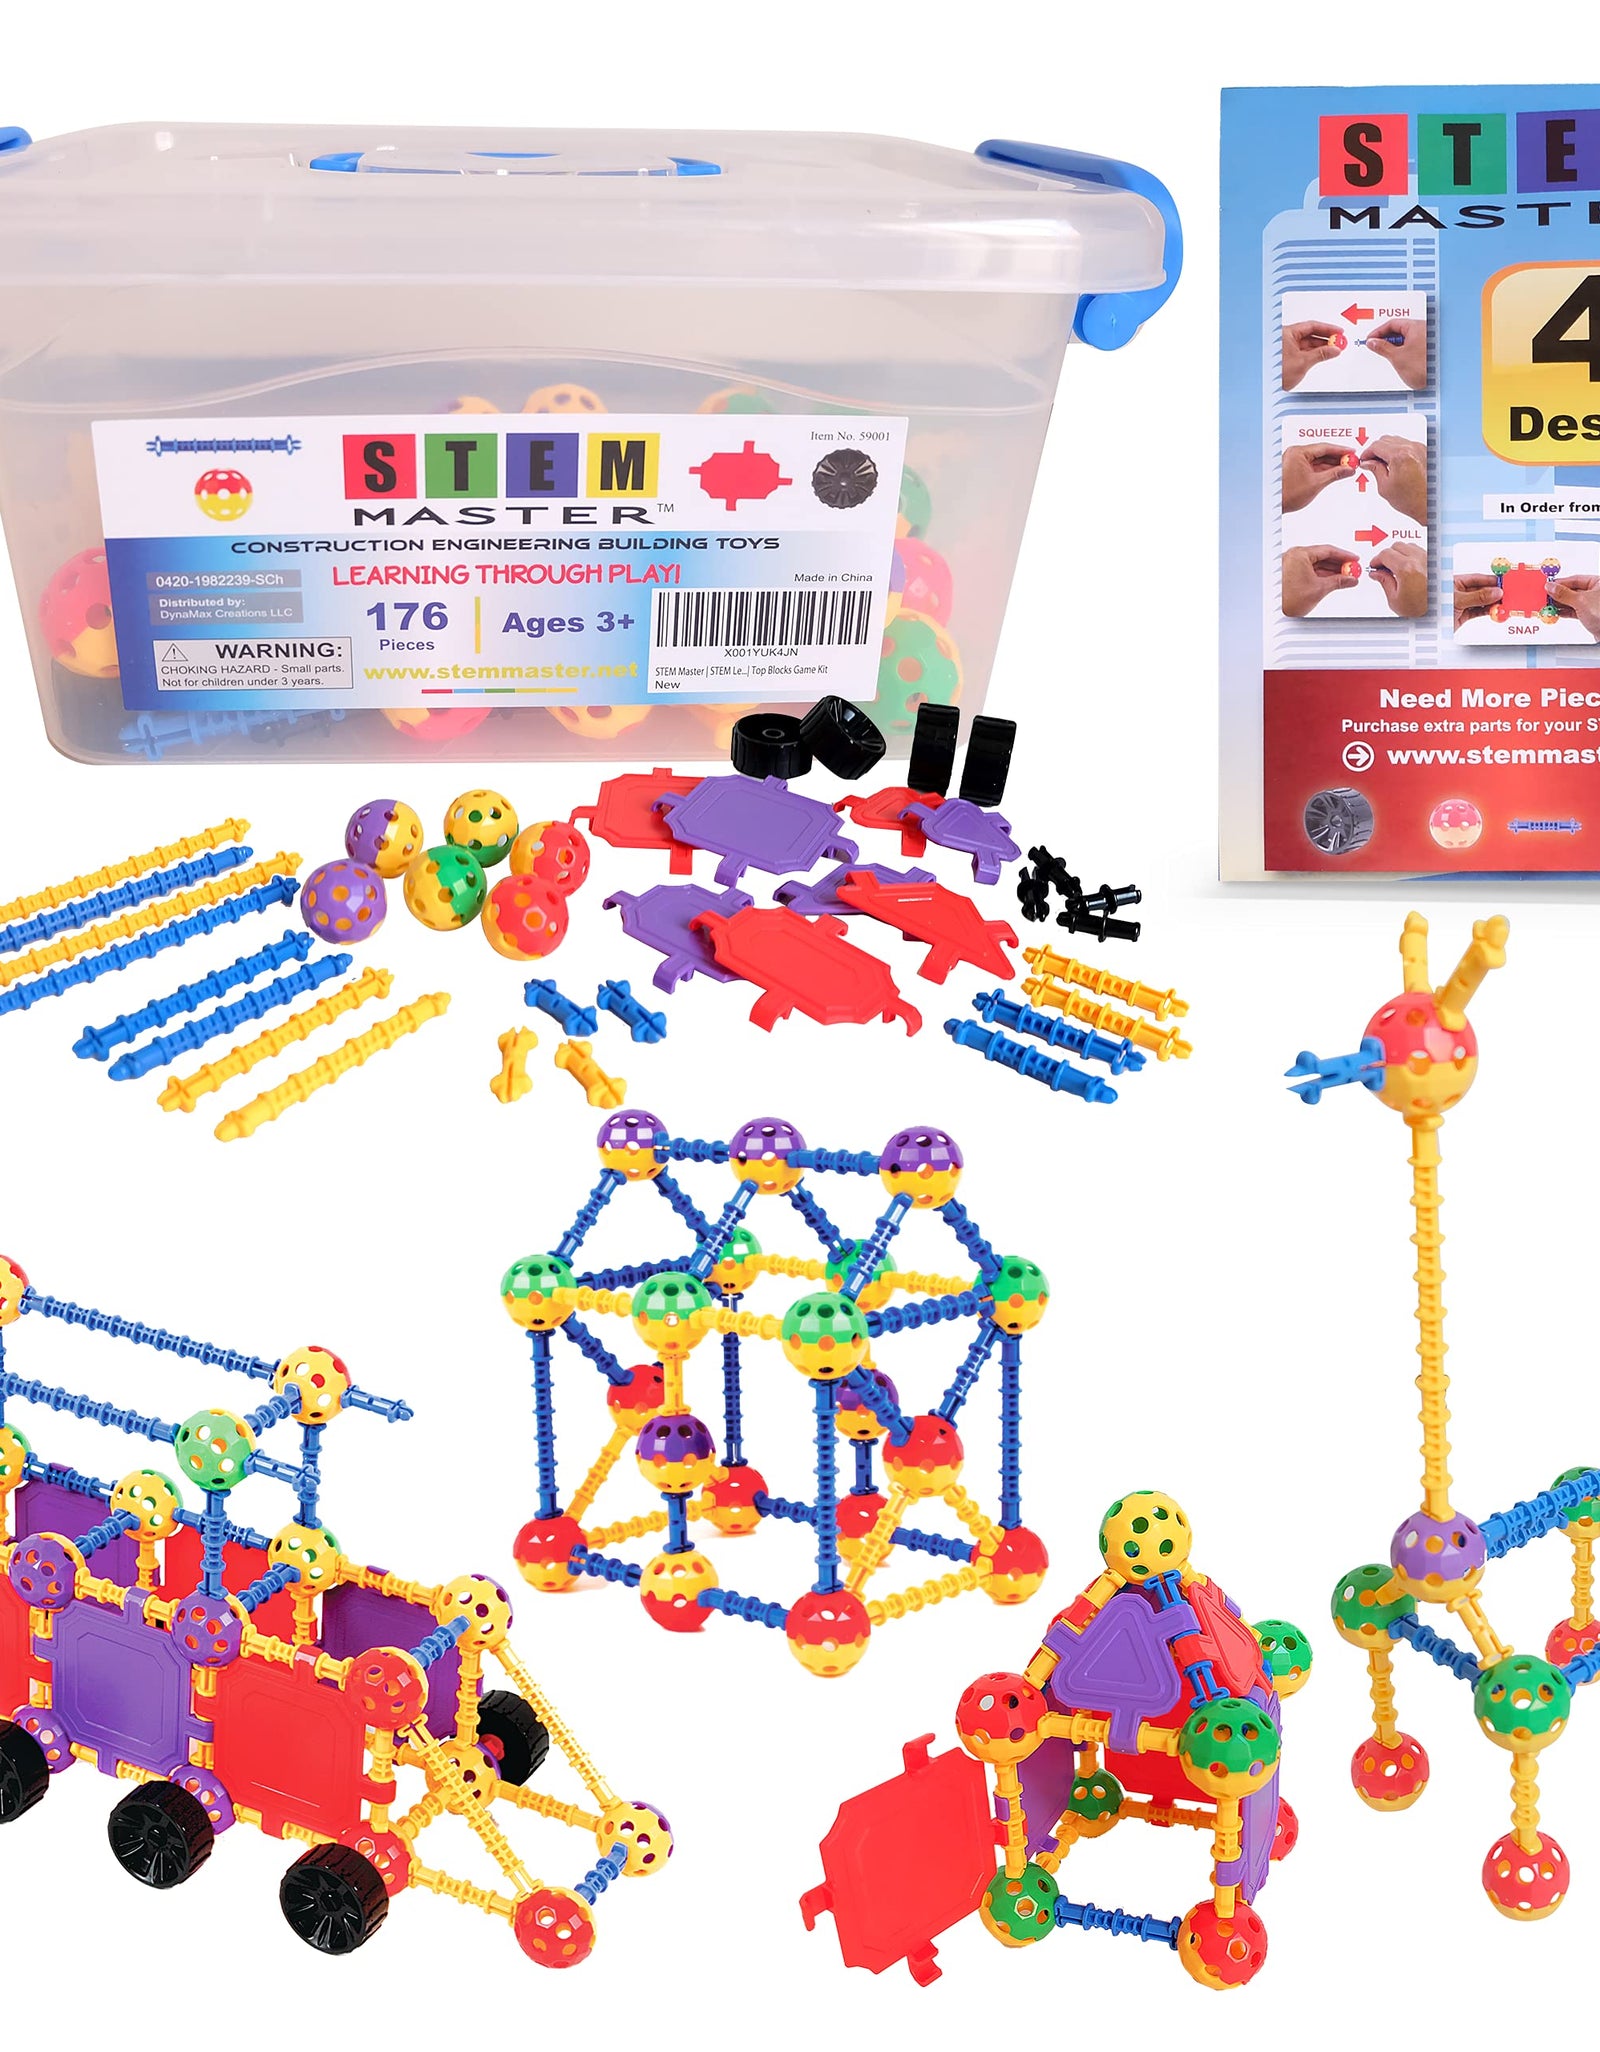 STEM Master Building Toys for Kids Ages 4-8 - STEM Toys Kit w/ 176 Durable Pieces, Full-Color Design Guide, Reusable Toy Storage Box - Educational Gifts for Girls & Boys